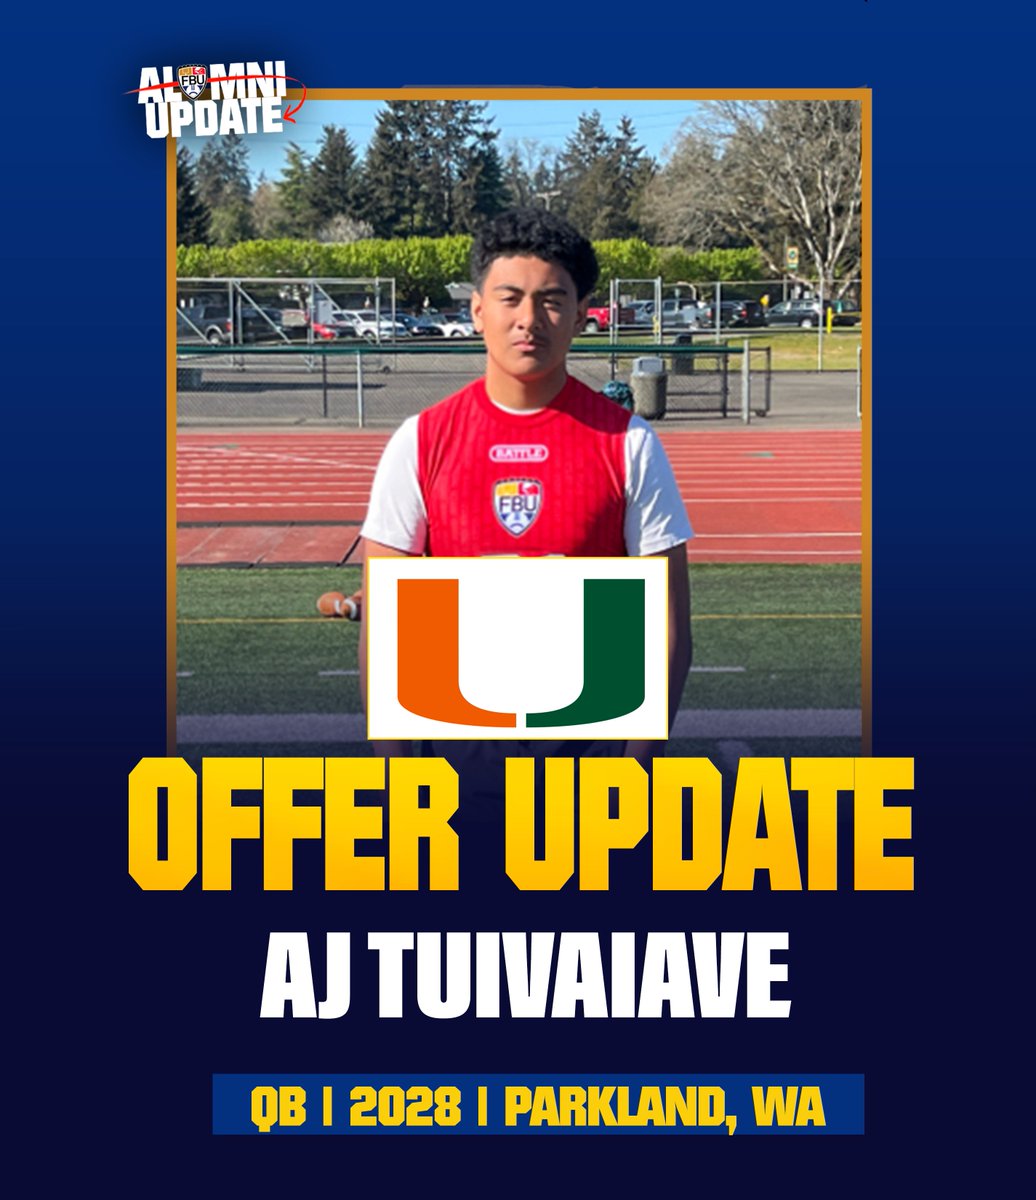 OFFER UPDATE ✅ #FBUPathAlum AJ Tuivaiave secures first D1 offer from University of Miami 🔥 Congratulations 👏 You Next? #FBU #GetBetterHere @AjTuivaiave